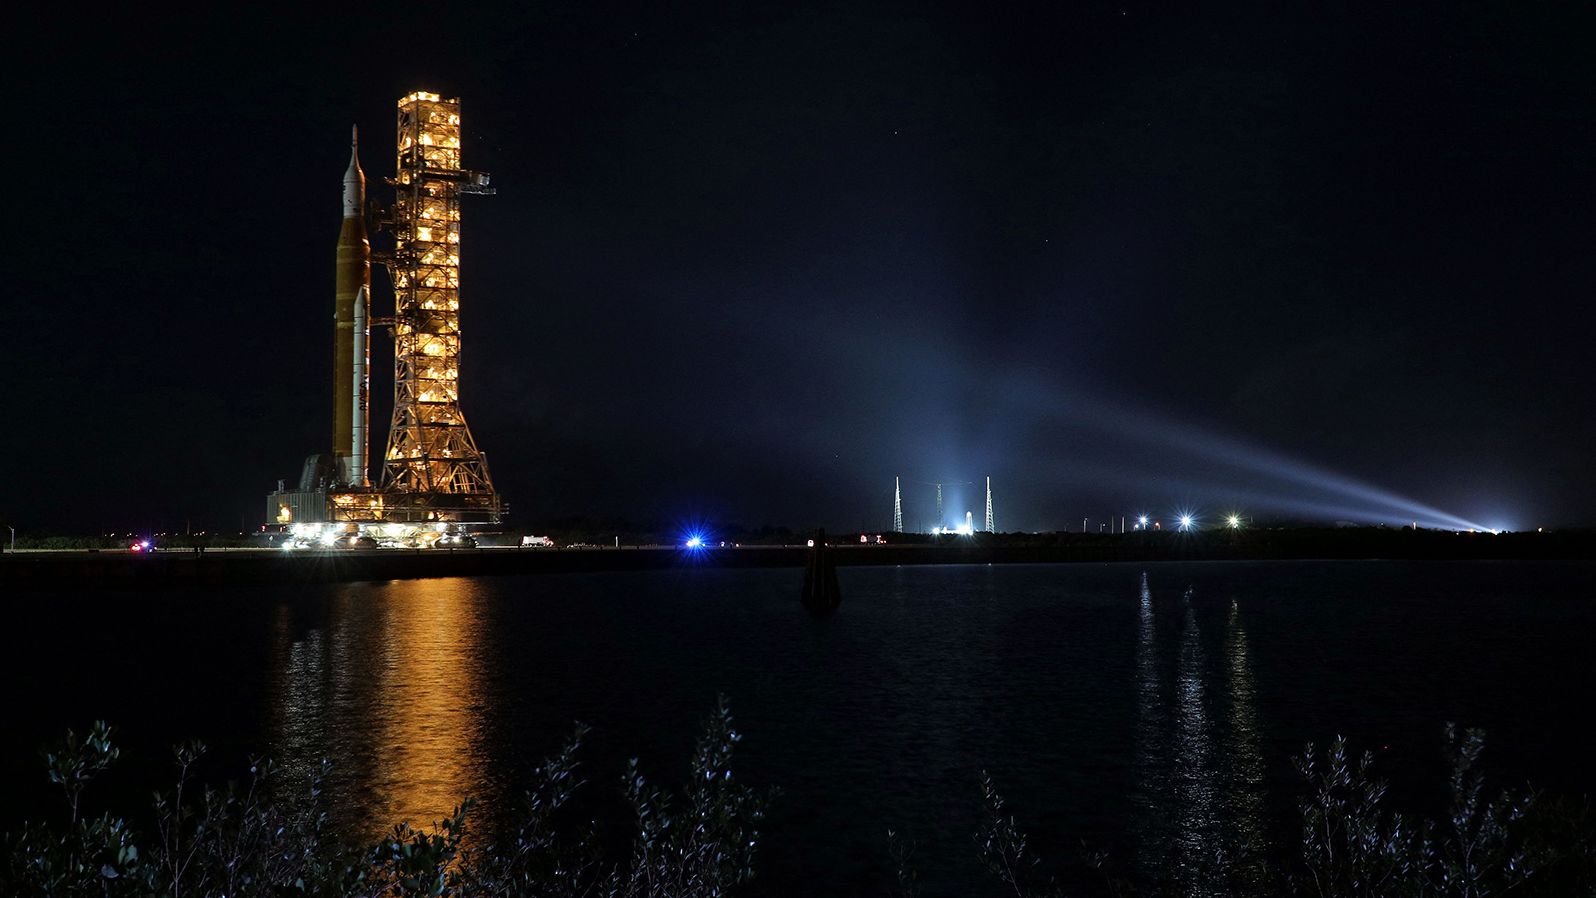 The Artemis-1 rocket is rolled out from the Vehicle Assembly Building en route to Launch Pad 39B shortly after midnight at the Kennedy Space Center in Florida on November 4.